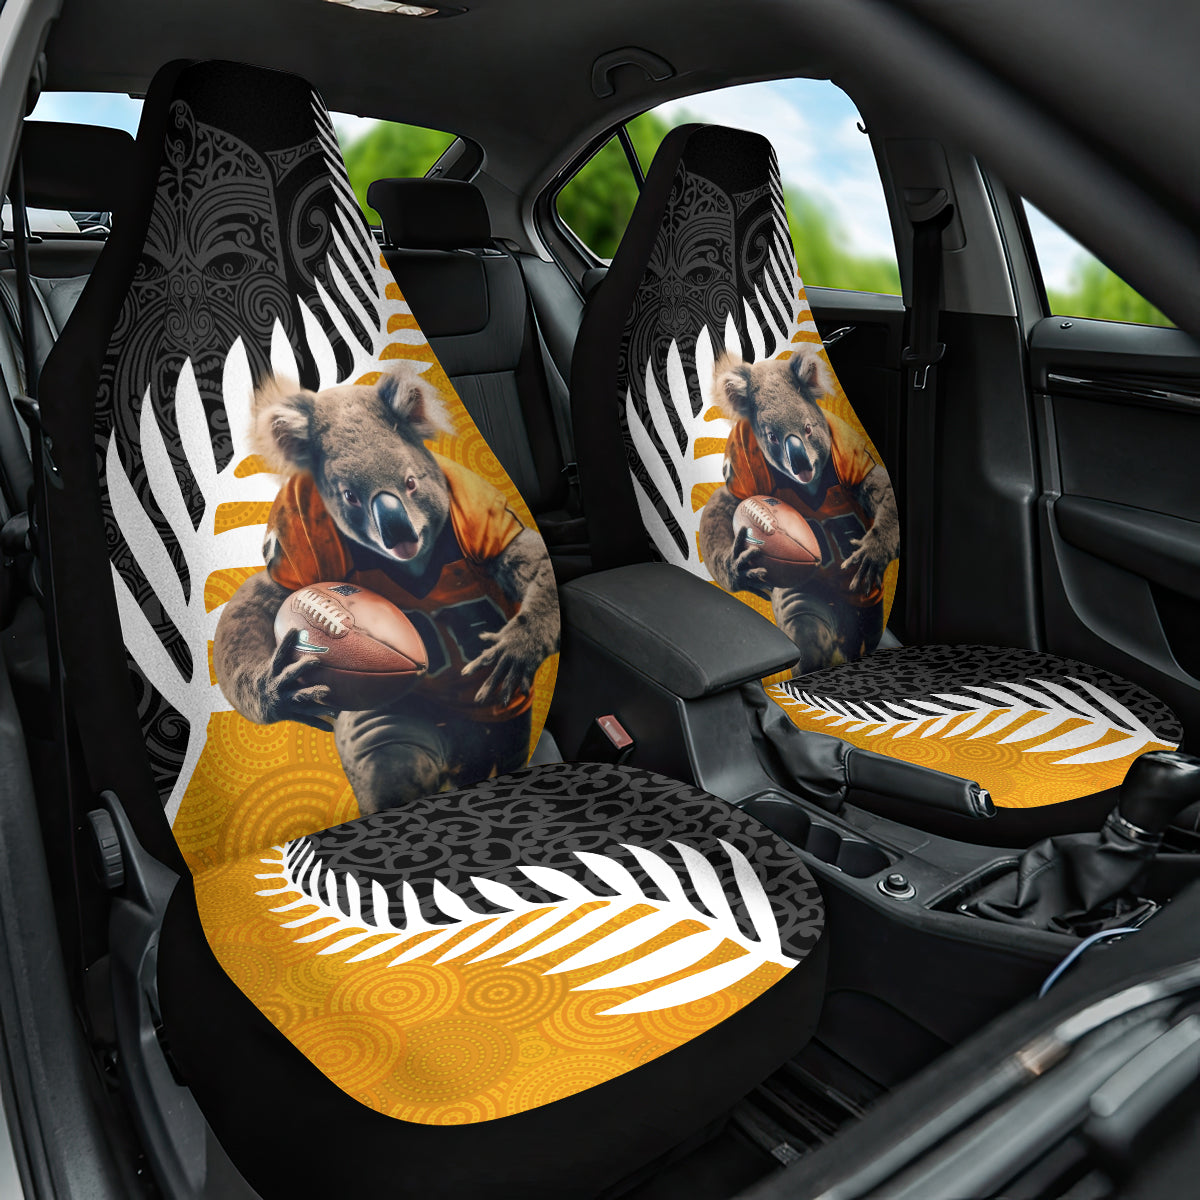 New Zealand and Australia Rugby Car Seat Cover Koala and Maori Warrior Together